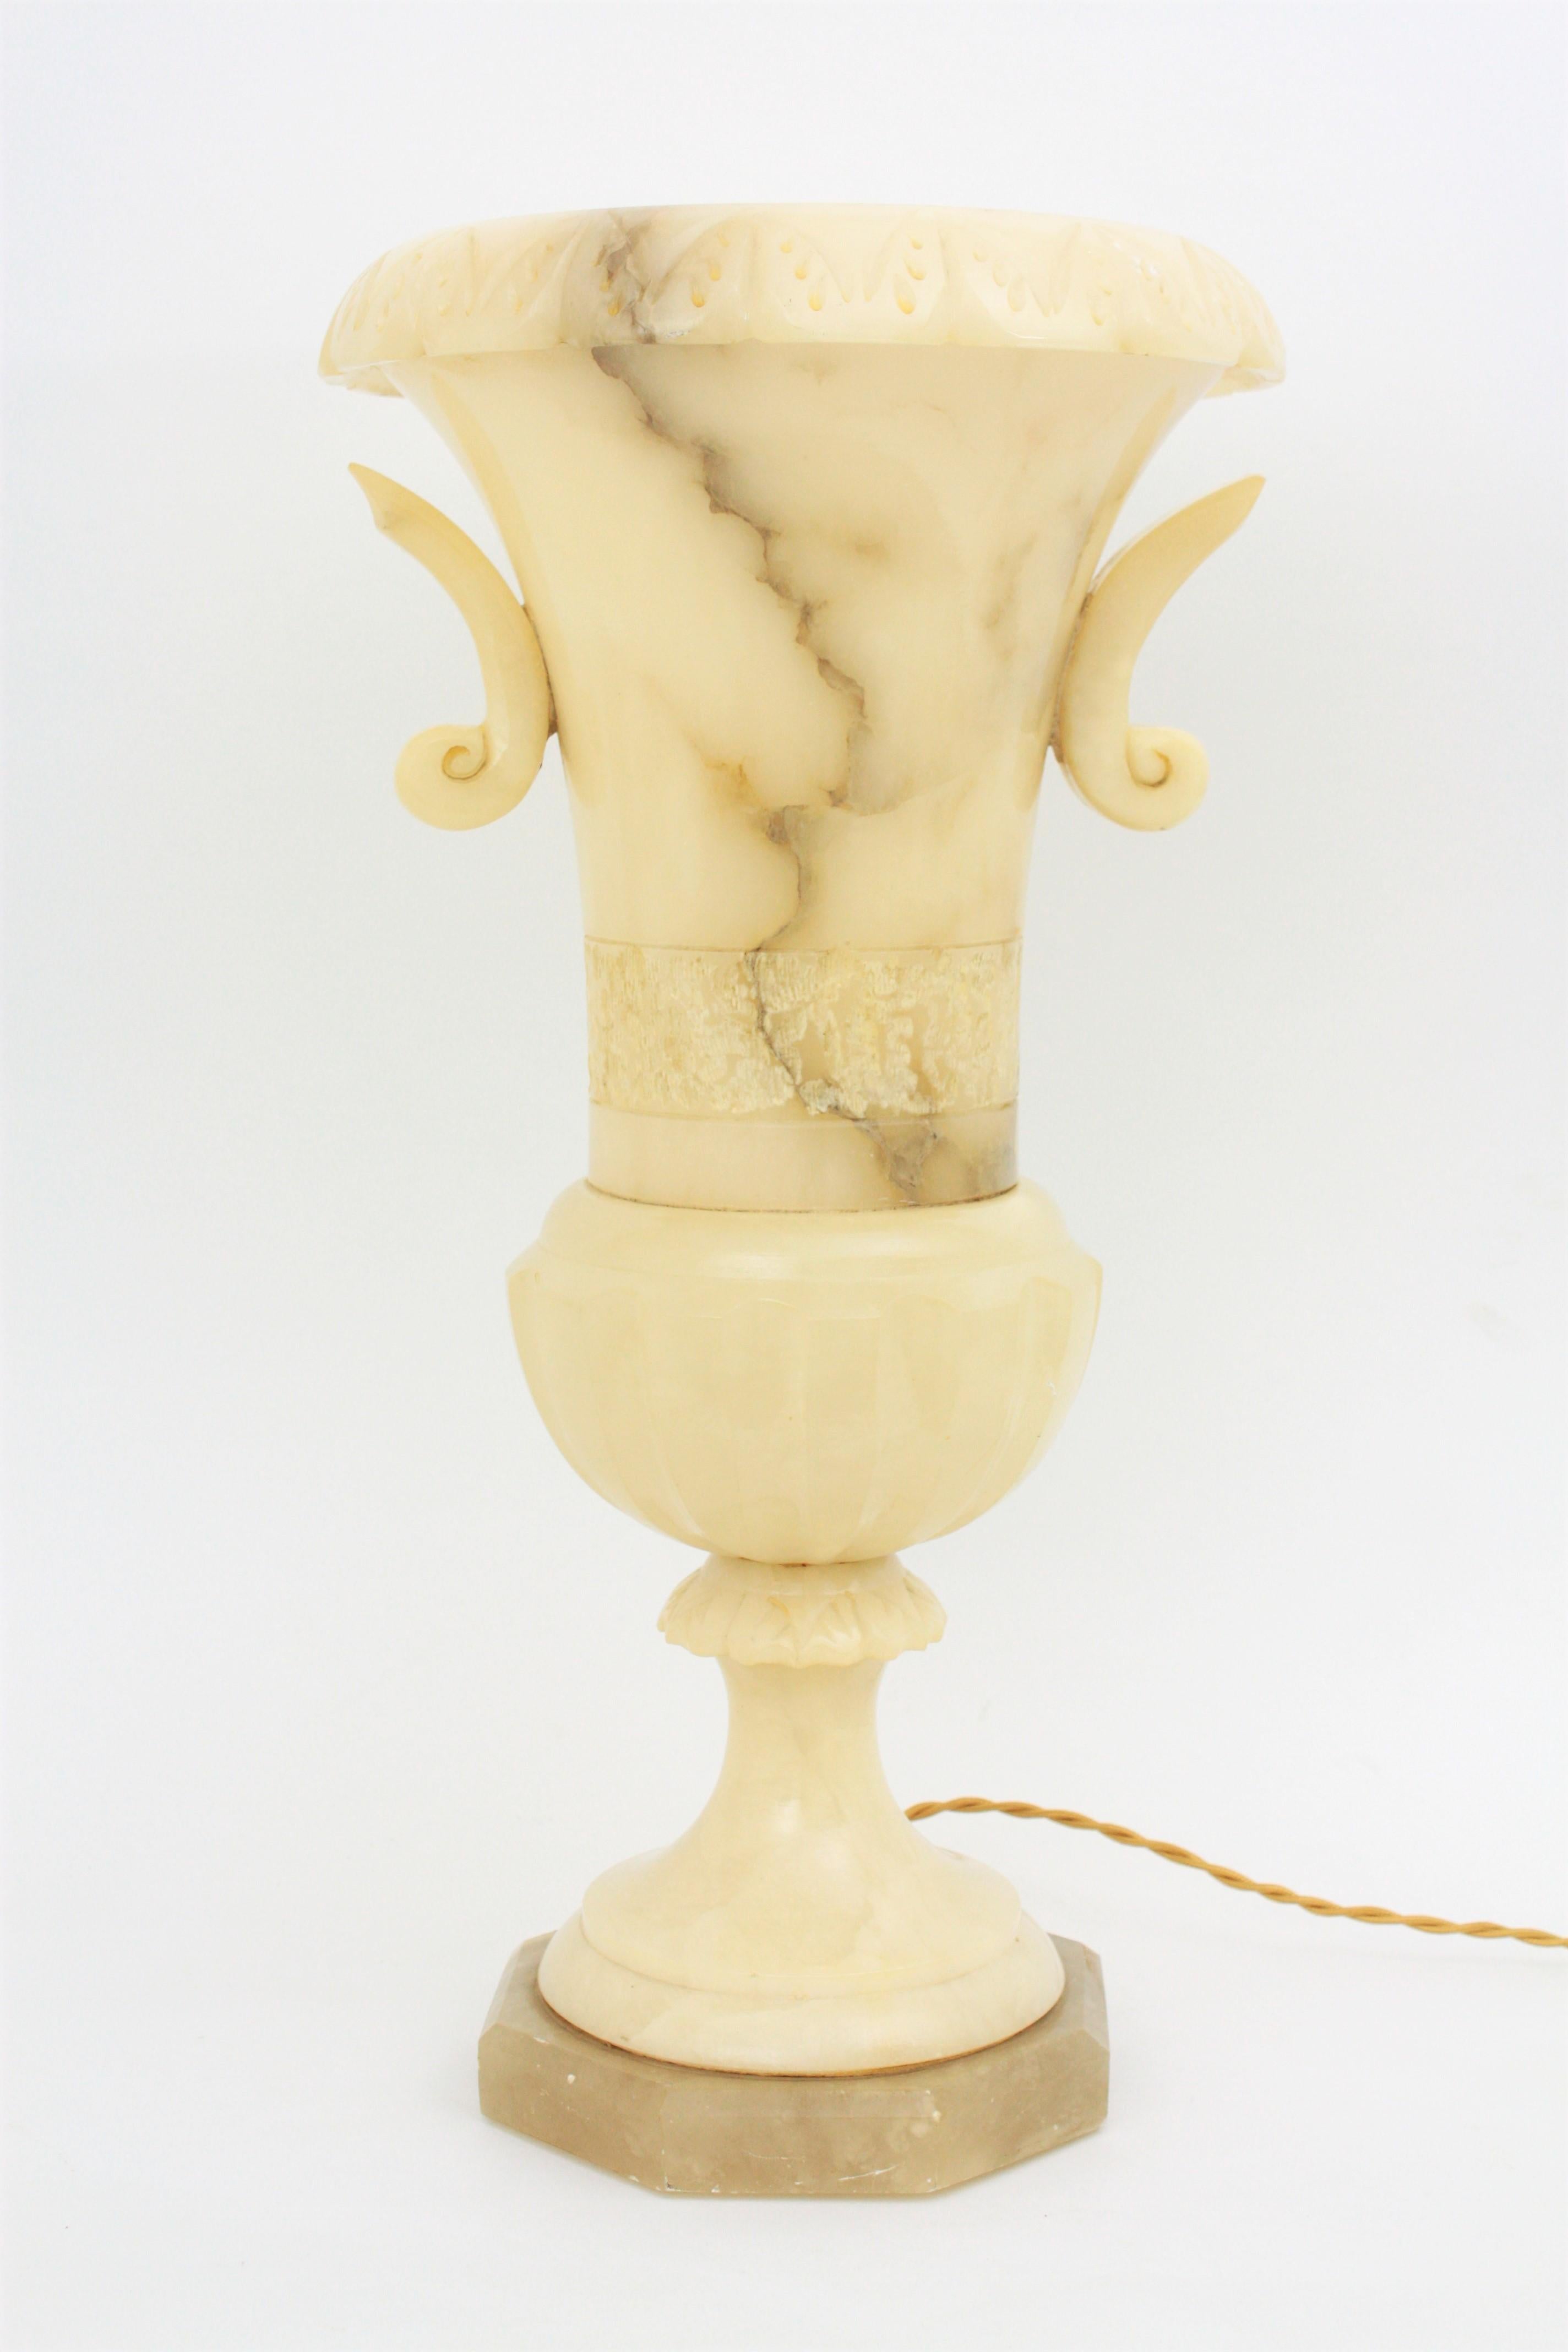 Sculptural large scale carved alabaster Art Deco period urn lamp with neoclassical design flanked by curved handles. Spain, 1930s.
It has carved decorations on the top, a decorative pattern surrounding the body, a magnificent color and an excellent